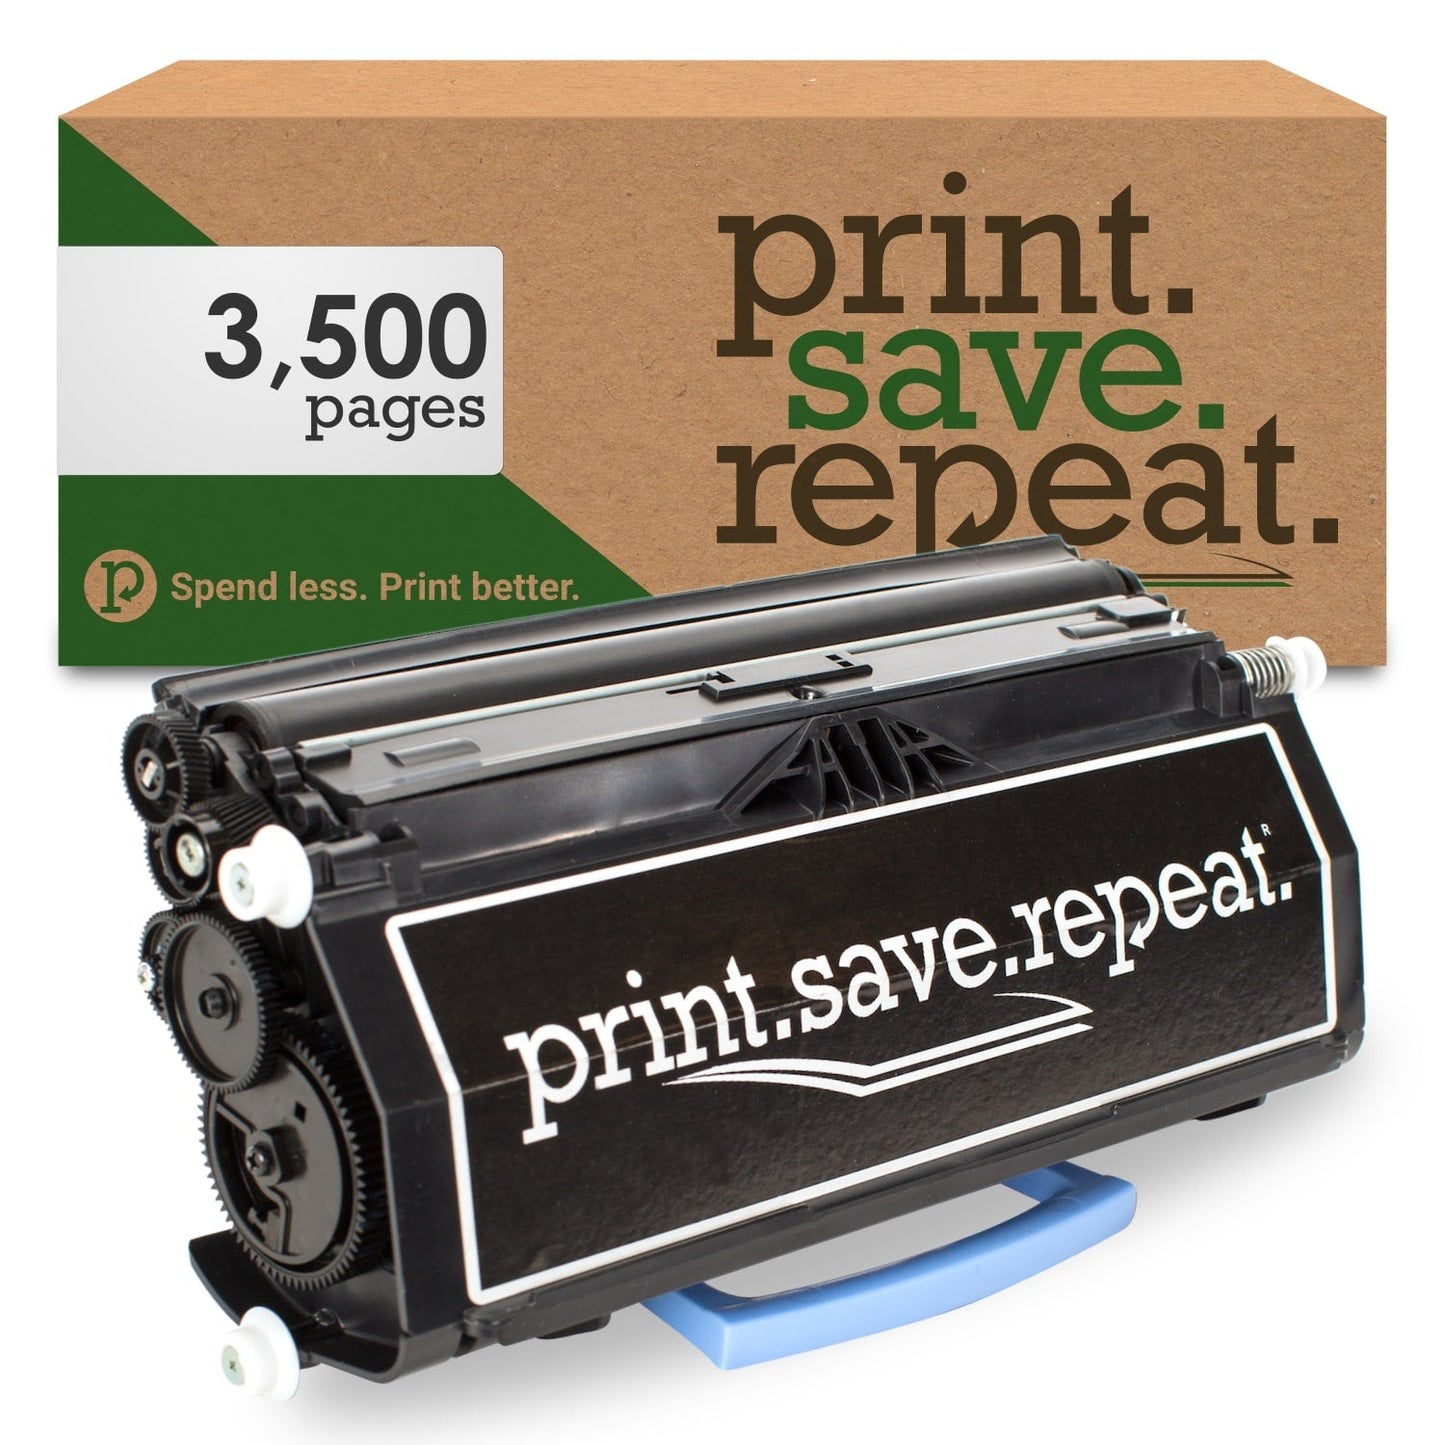 Print.Save.Repeat. Lexmark X463A11G Remanufactured Toner Cartridge for X463, X464, X466 [3,500 Pages]